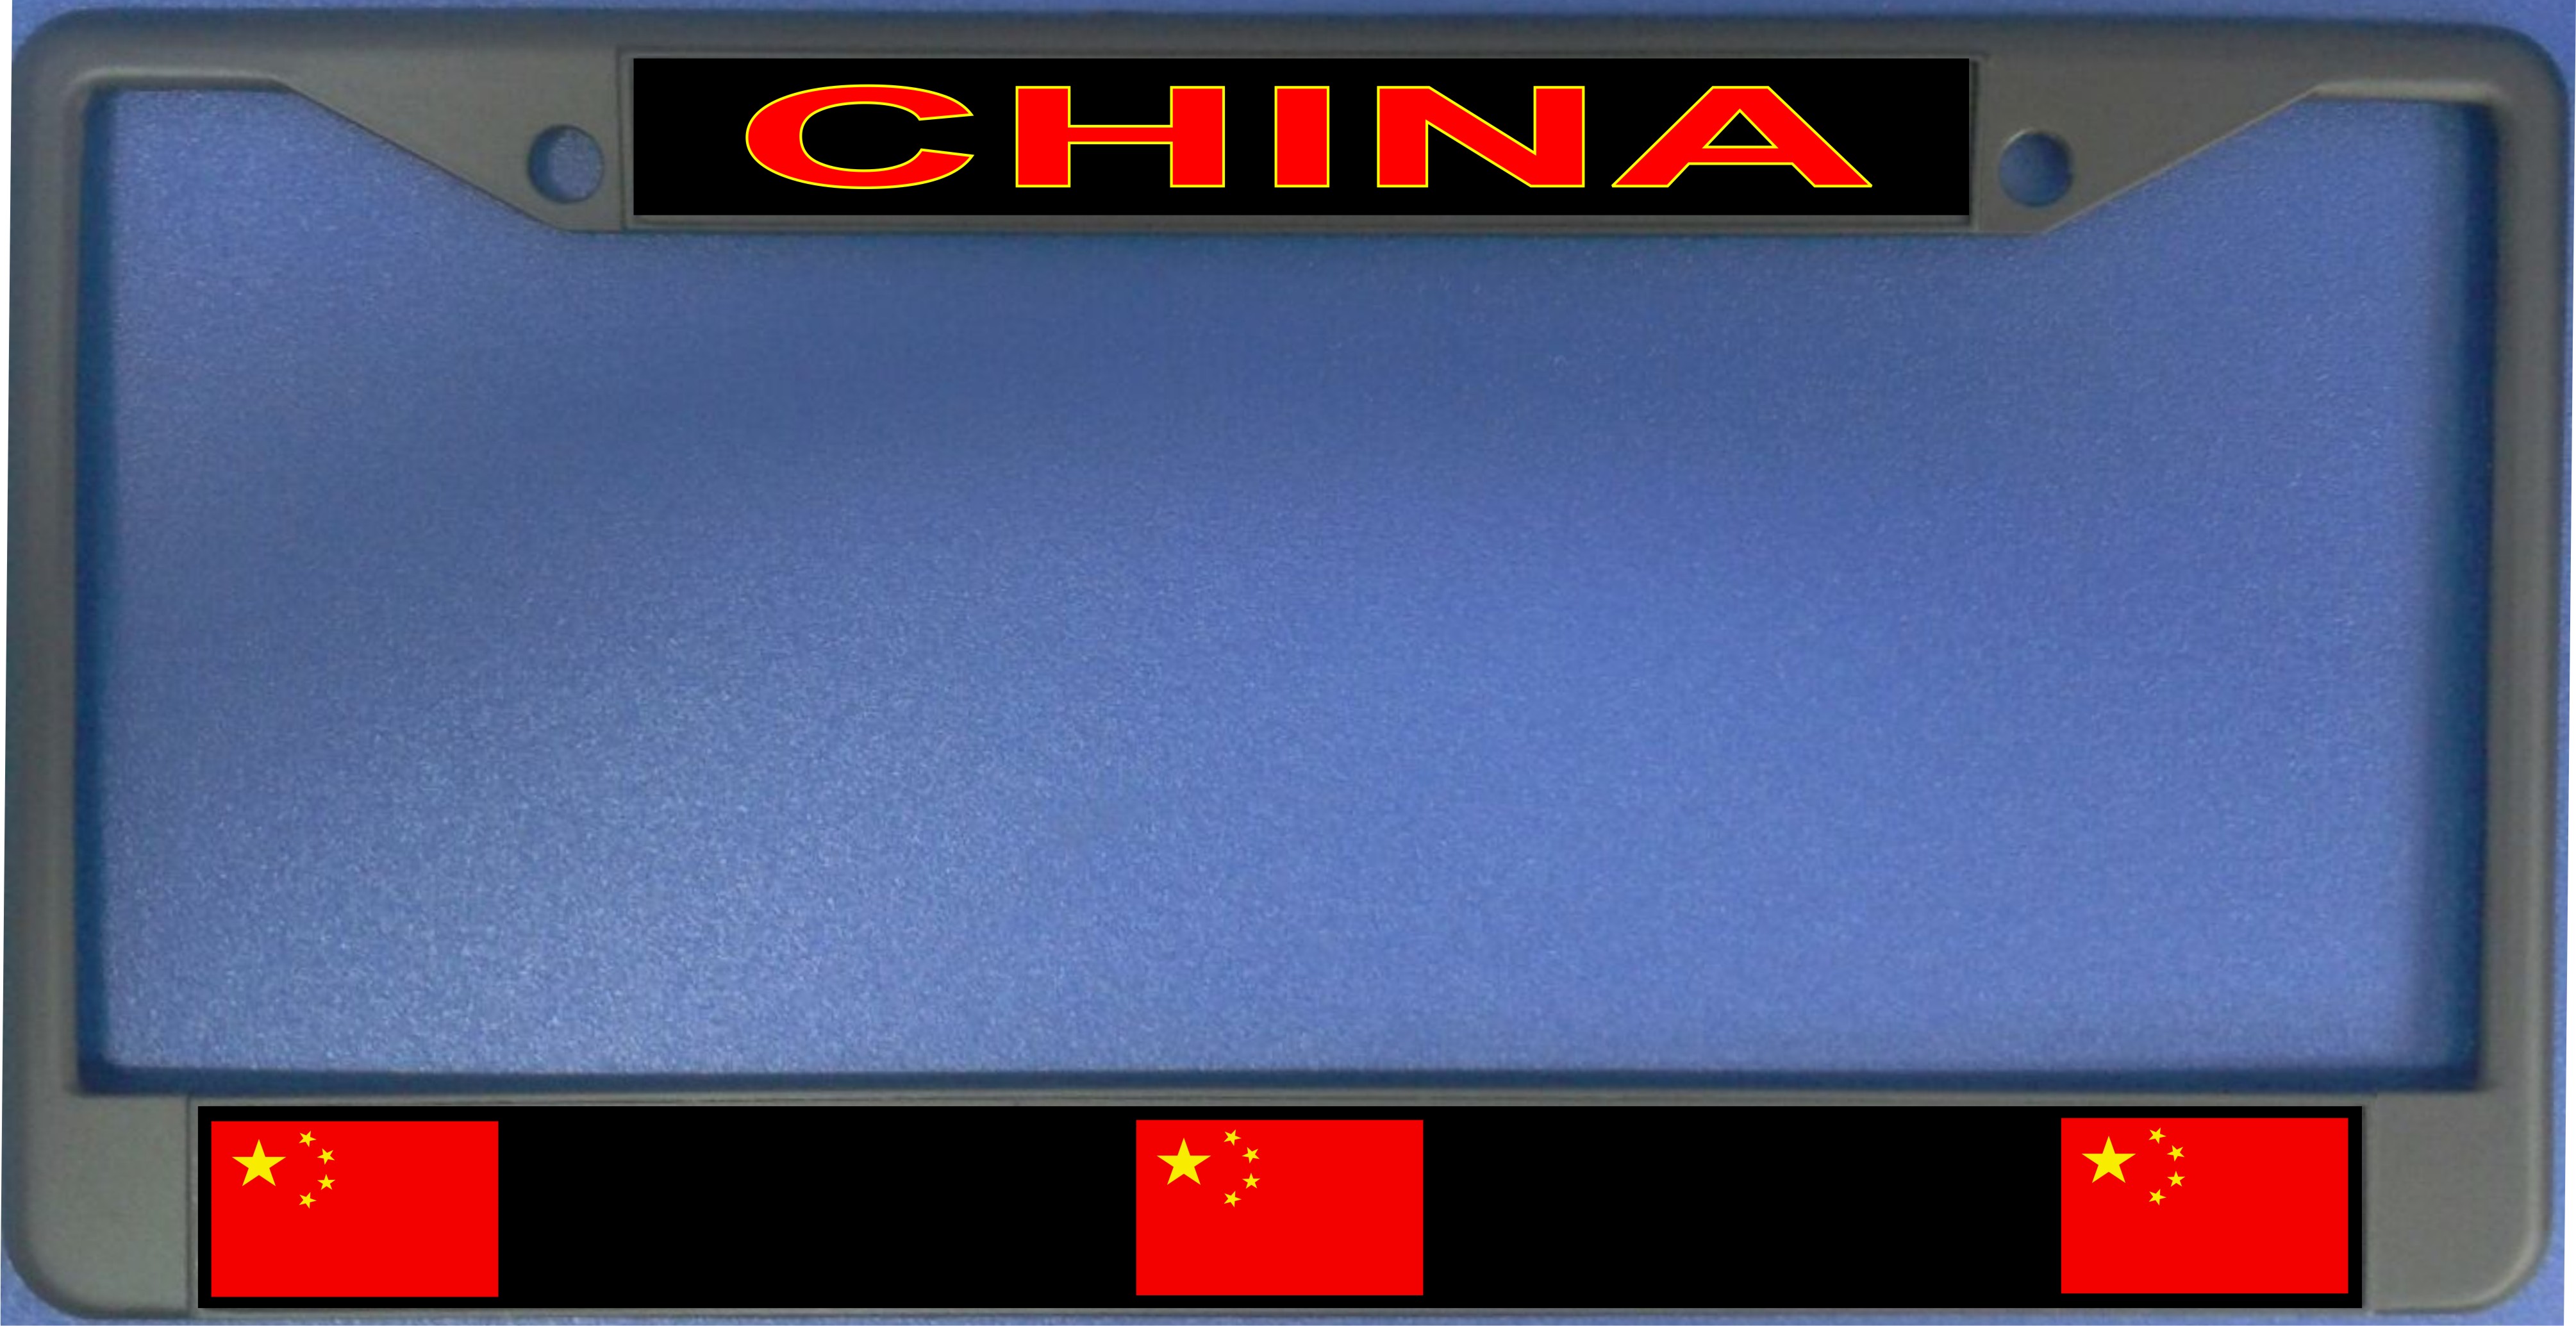 China FLAG Photo License Plate Frame  Free Screw Caps with this Frame